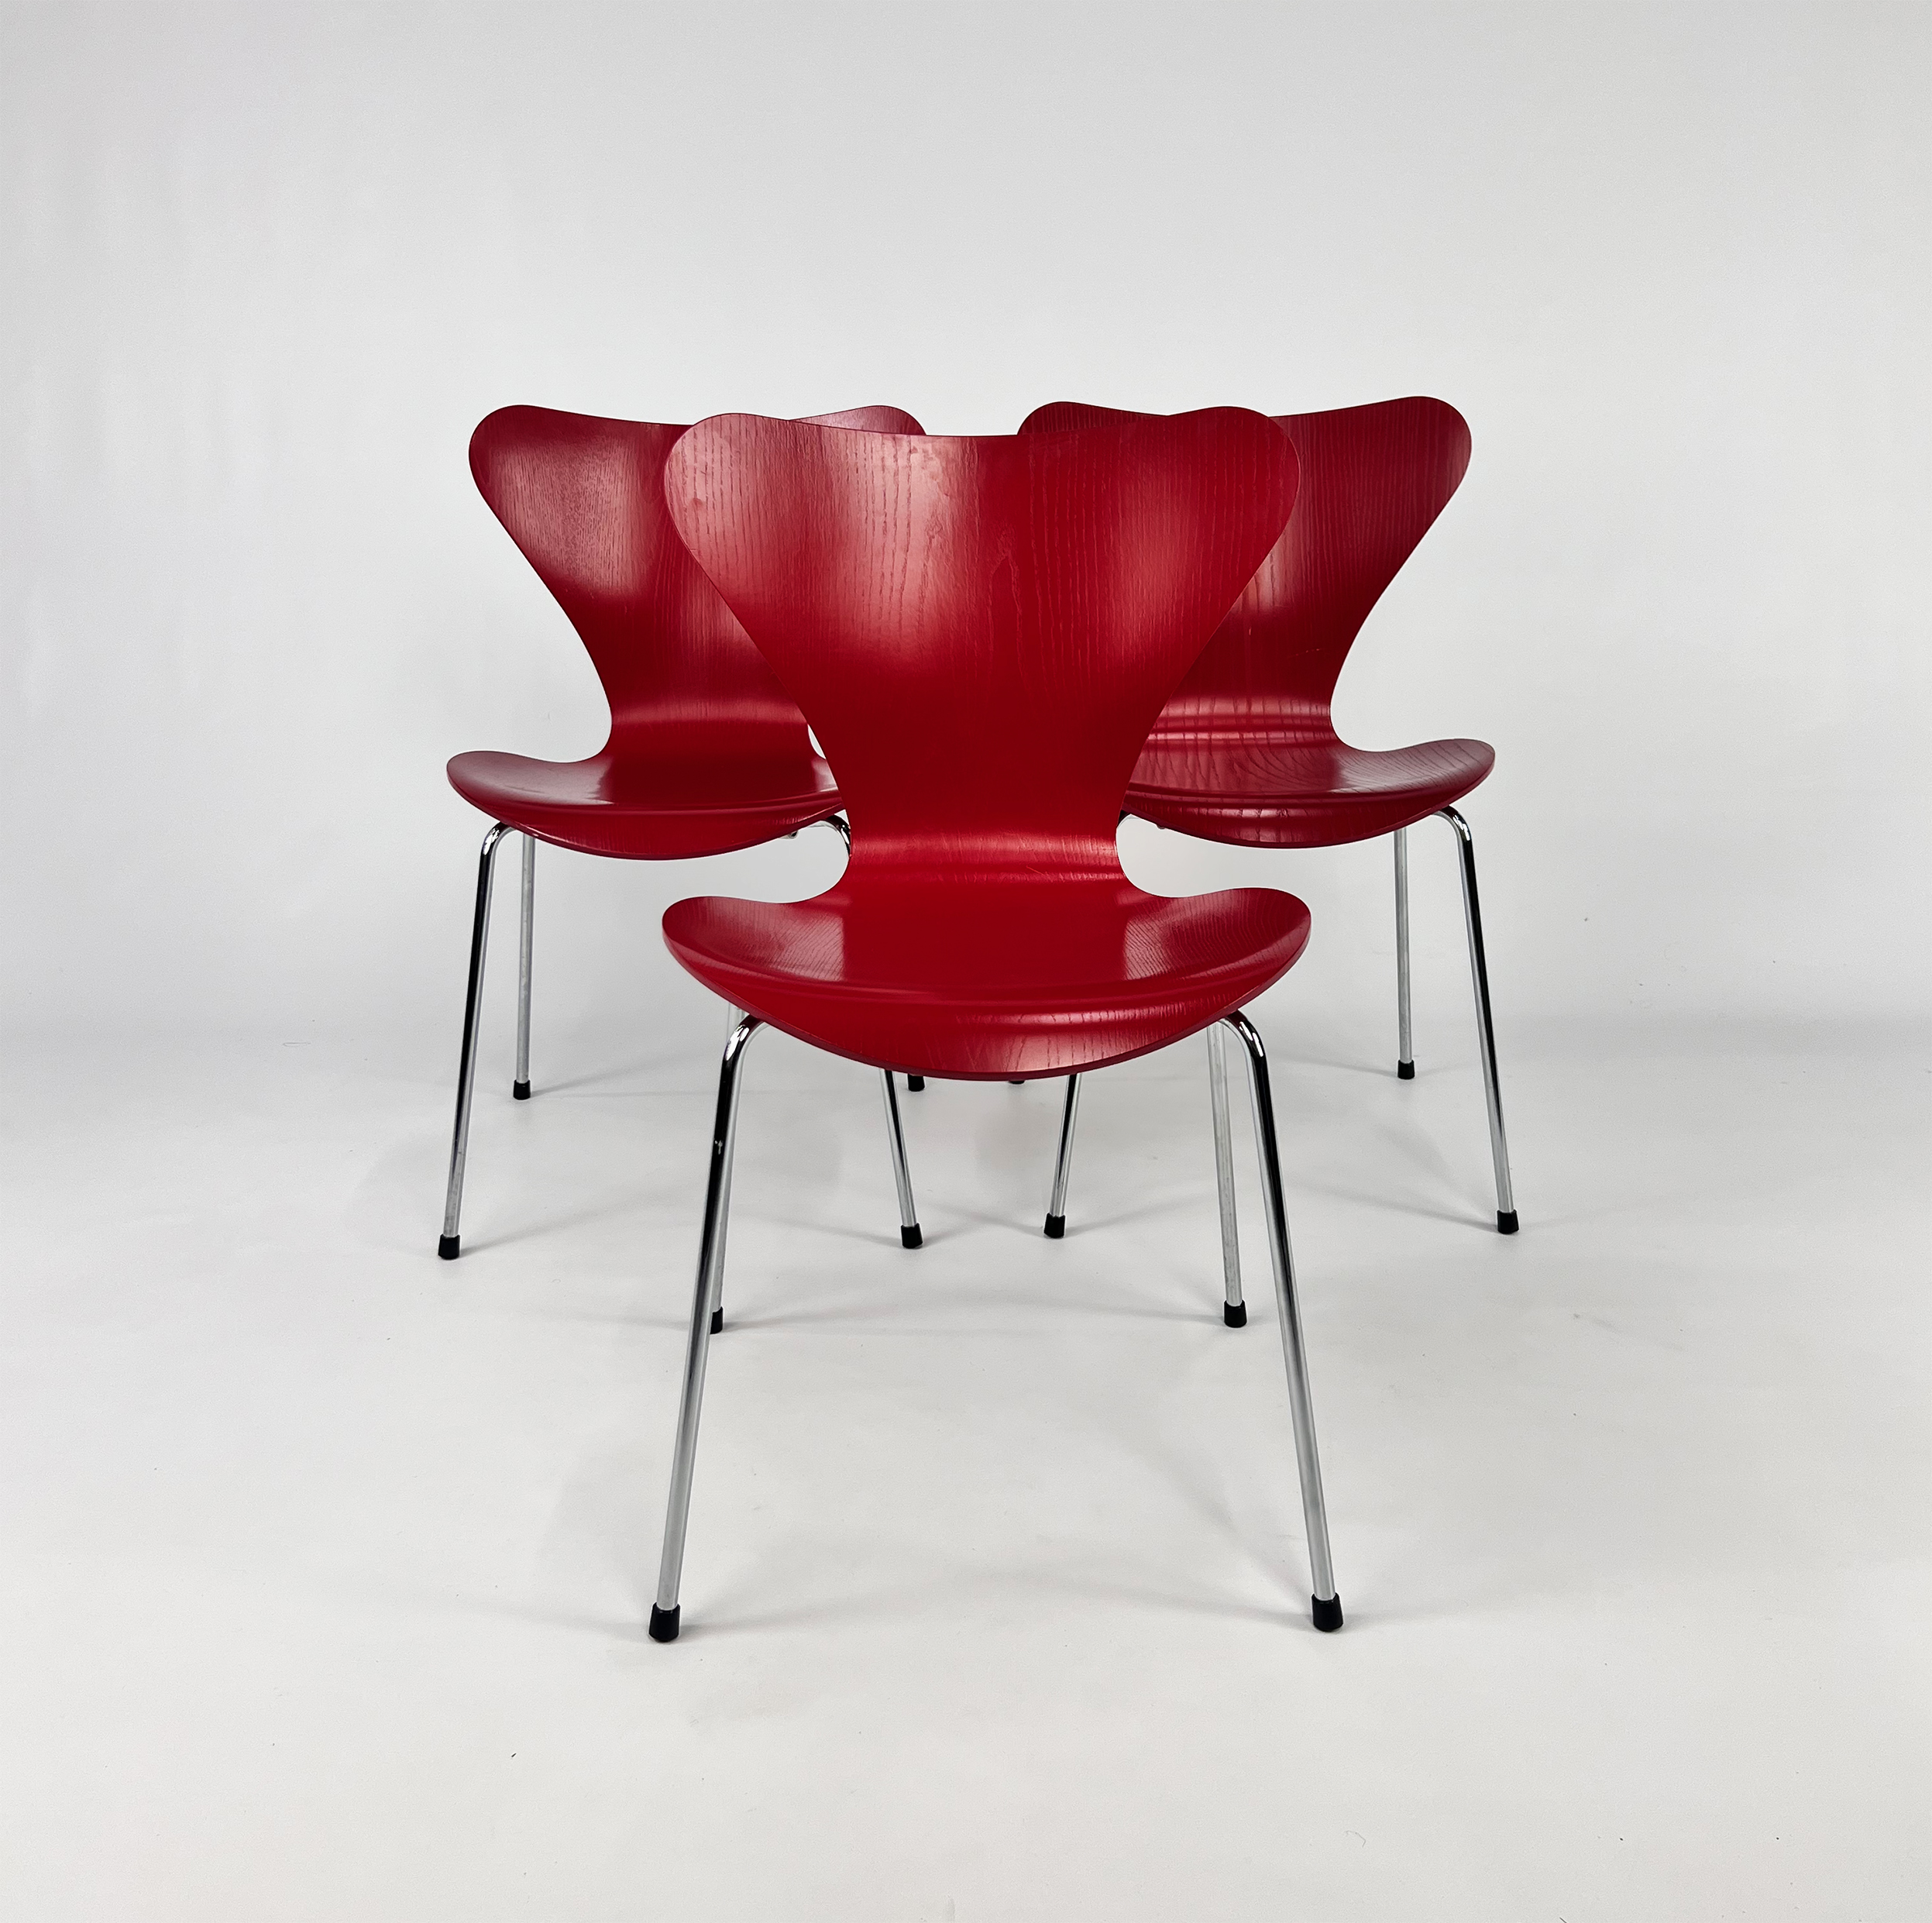 Set of 3 Butterfly Chairs by Arne Jacobsen for Fritz Hansen, 2006